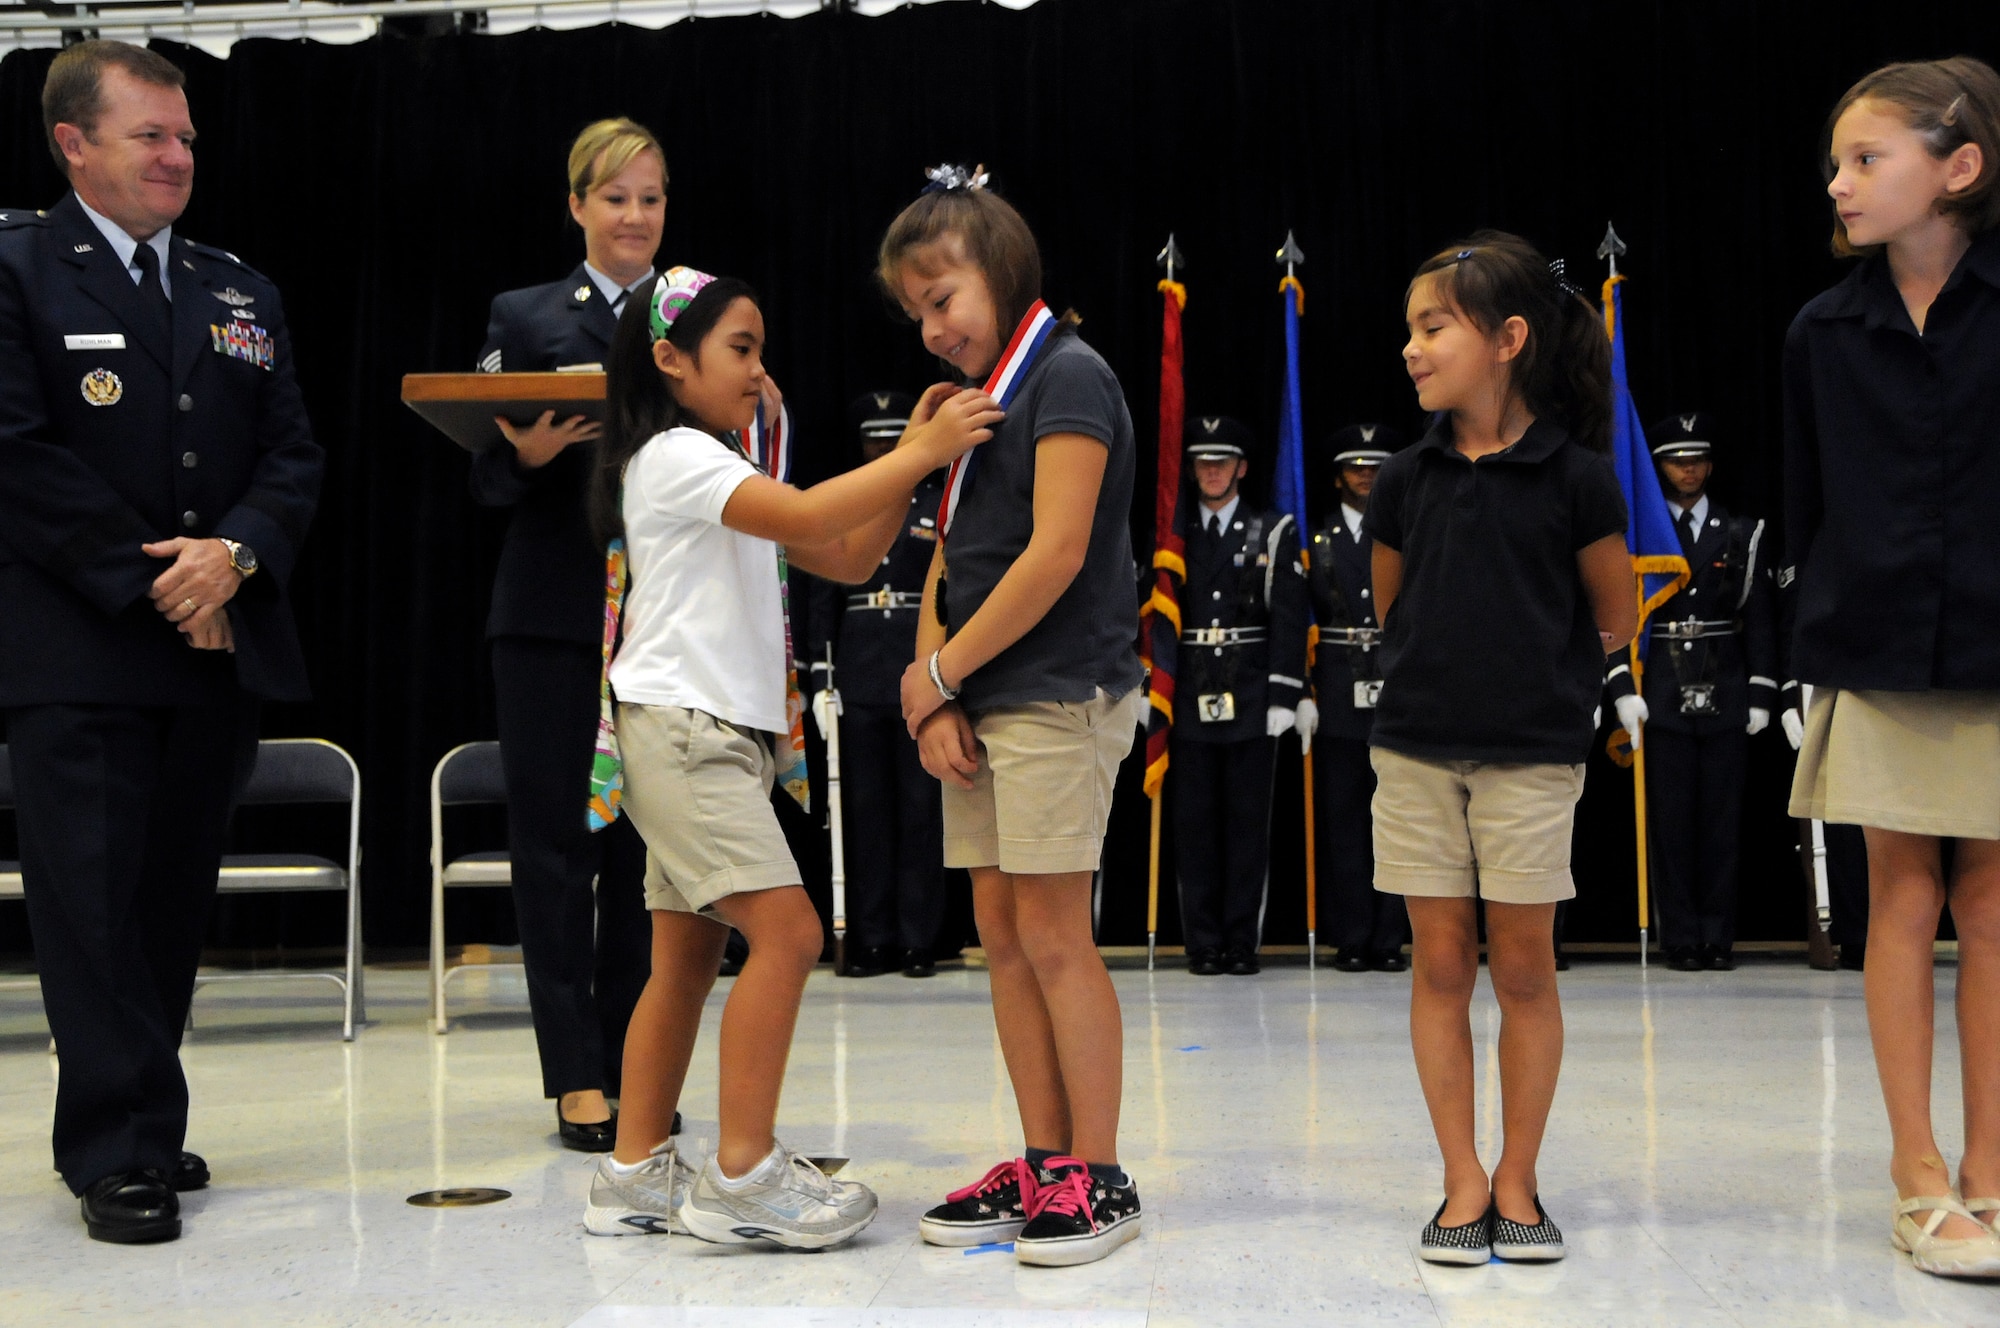 ANDERSEN AIR FORCE BASE, Guam - Jaeleen Jaylo presents Katelyn Powell with a medal that reads "Life Saver Award:  Presented to (Name).  For Your Efforts To Assist Jaeleen Jaylo on November 14, 2008" along with four other heroic girls during the Andersen Elementary School Awards Ceremony here March 4. Katelyn Powell was the first to see Jaeleen Jaylo underwater and asked her sister Mackenzie Powell to dive down and see what was happening. Mackenzie was not strong enough to move Jaeleen, so she returned to the surface to inform her sister, who then asked Brooke Hummel to see if she could retrieve her from the bottom. These young ladies -- these young heroes were very instrumental to saving Jaeleen's life.(U.S. Air Force photo by Airman 1st Class Courtney Witt)
